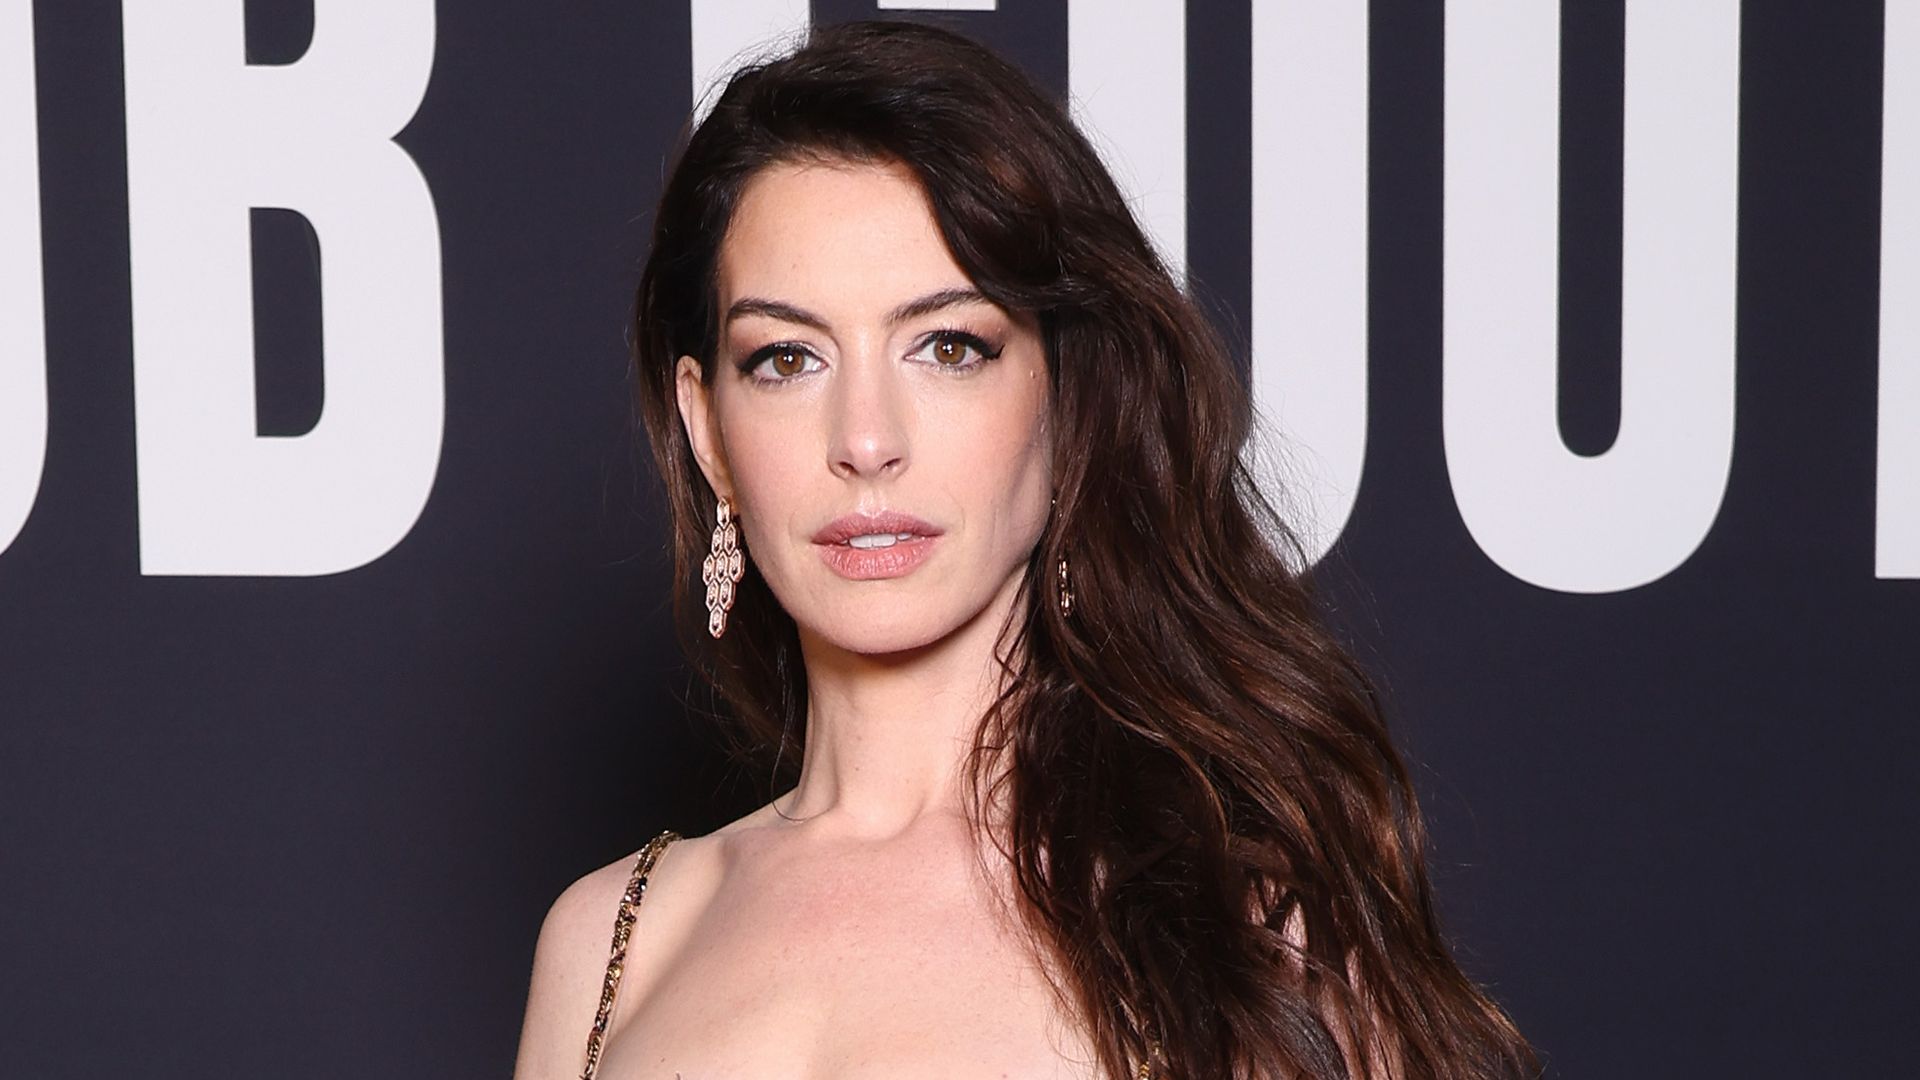 Anne Hathaway is a vision in jaw-dropping sheer corset dress